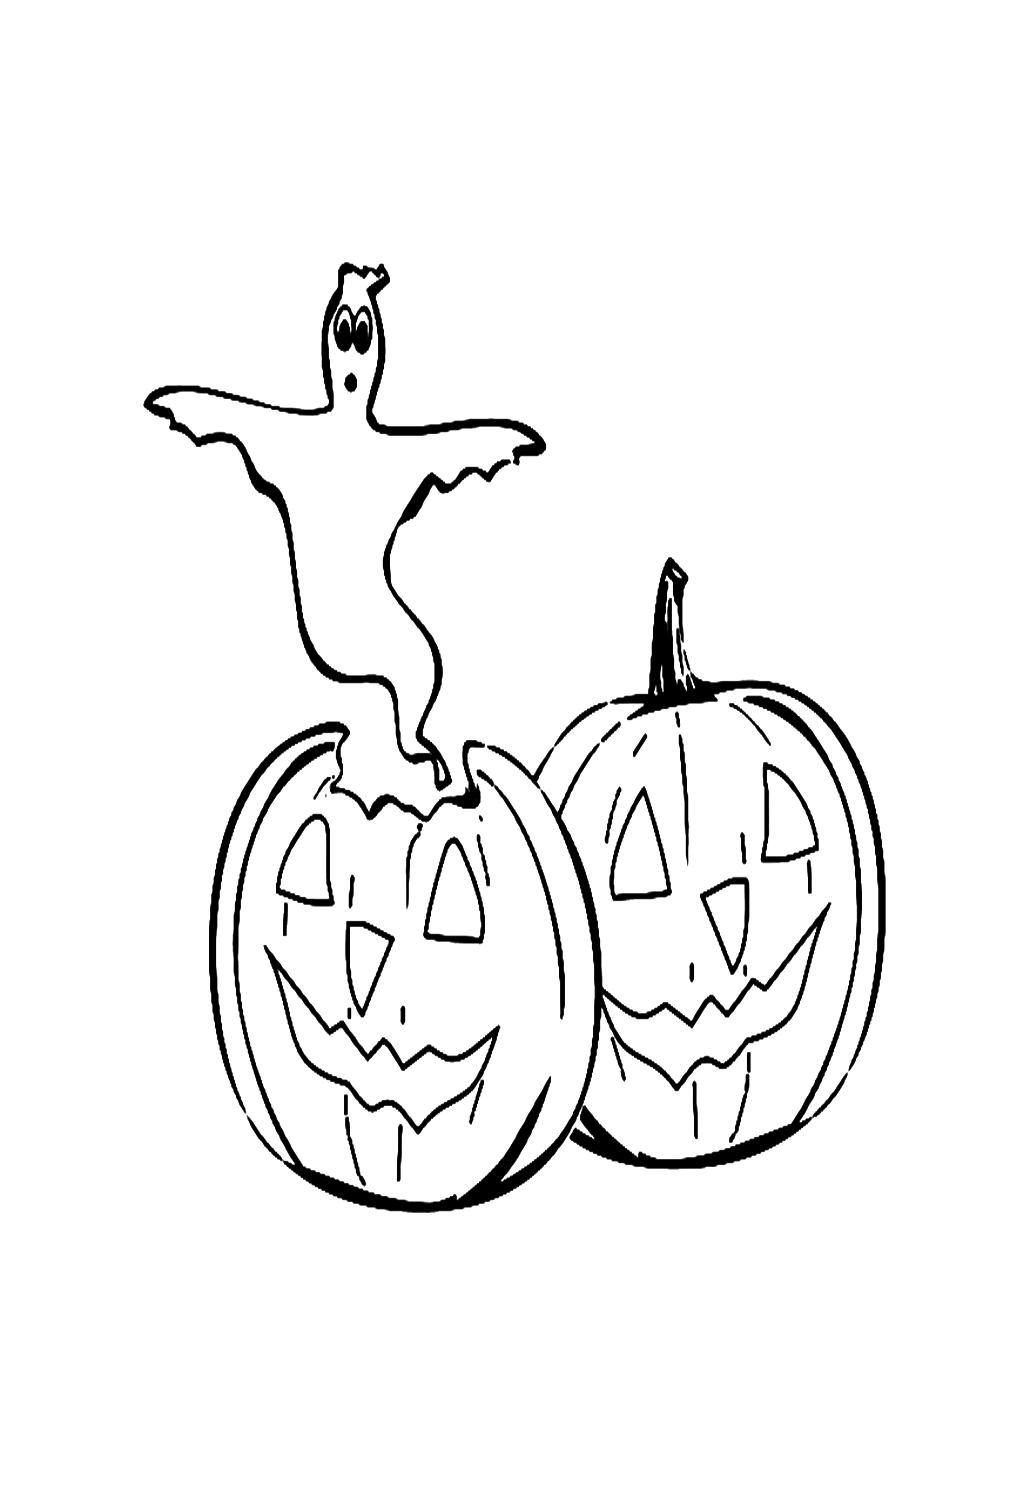 The Cute Halloween Pumpkins And Ghost Coloring Pages